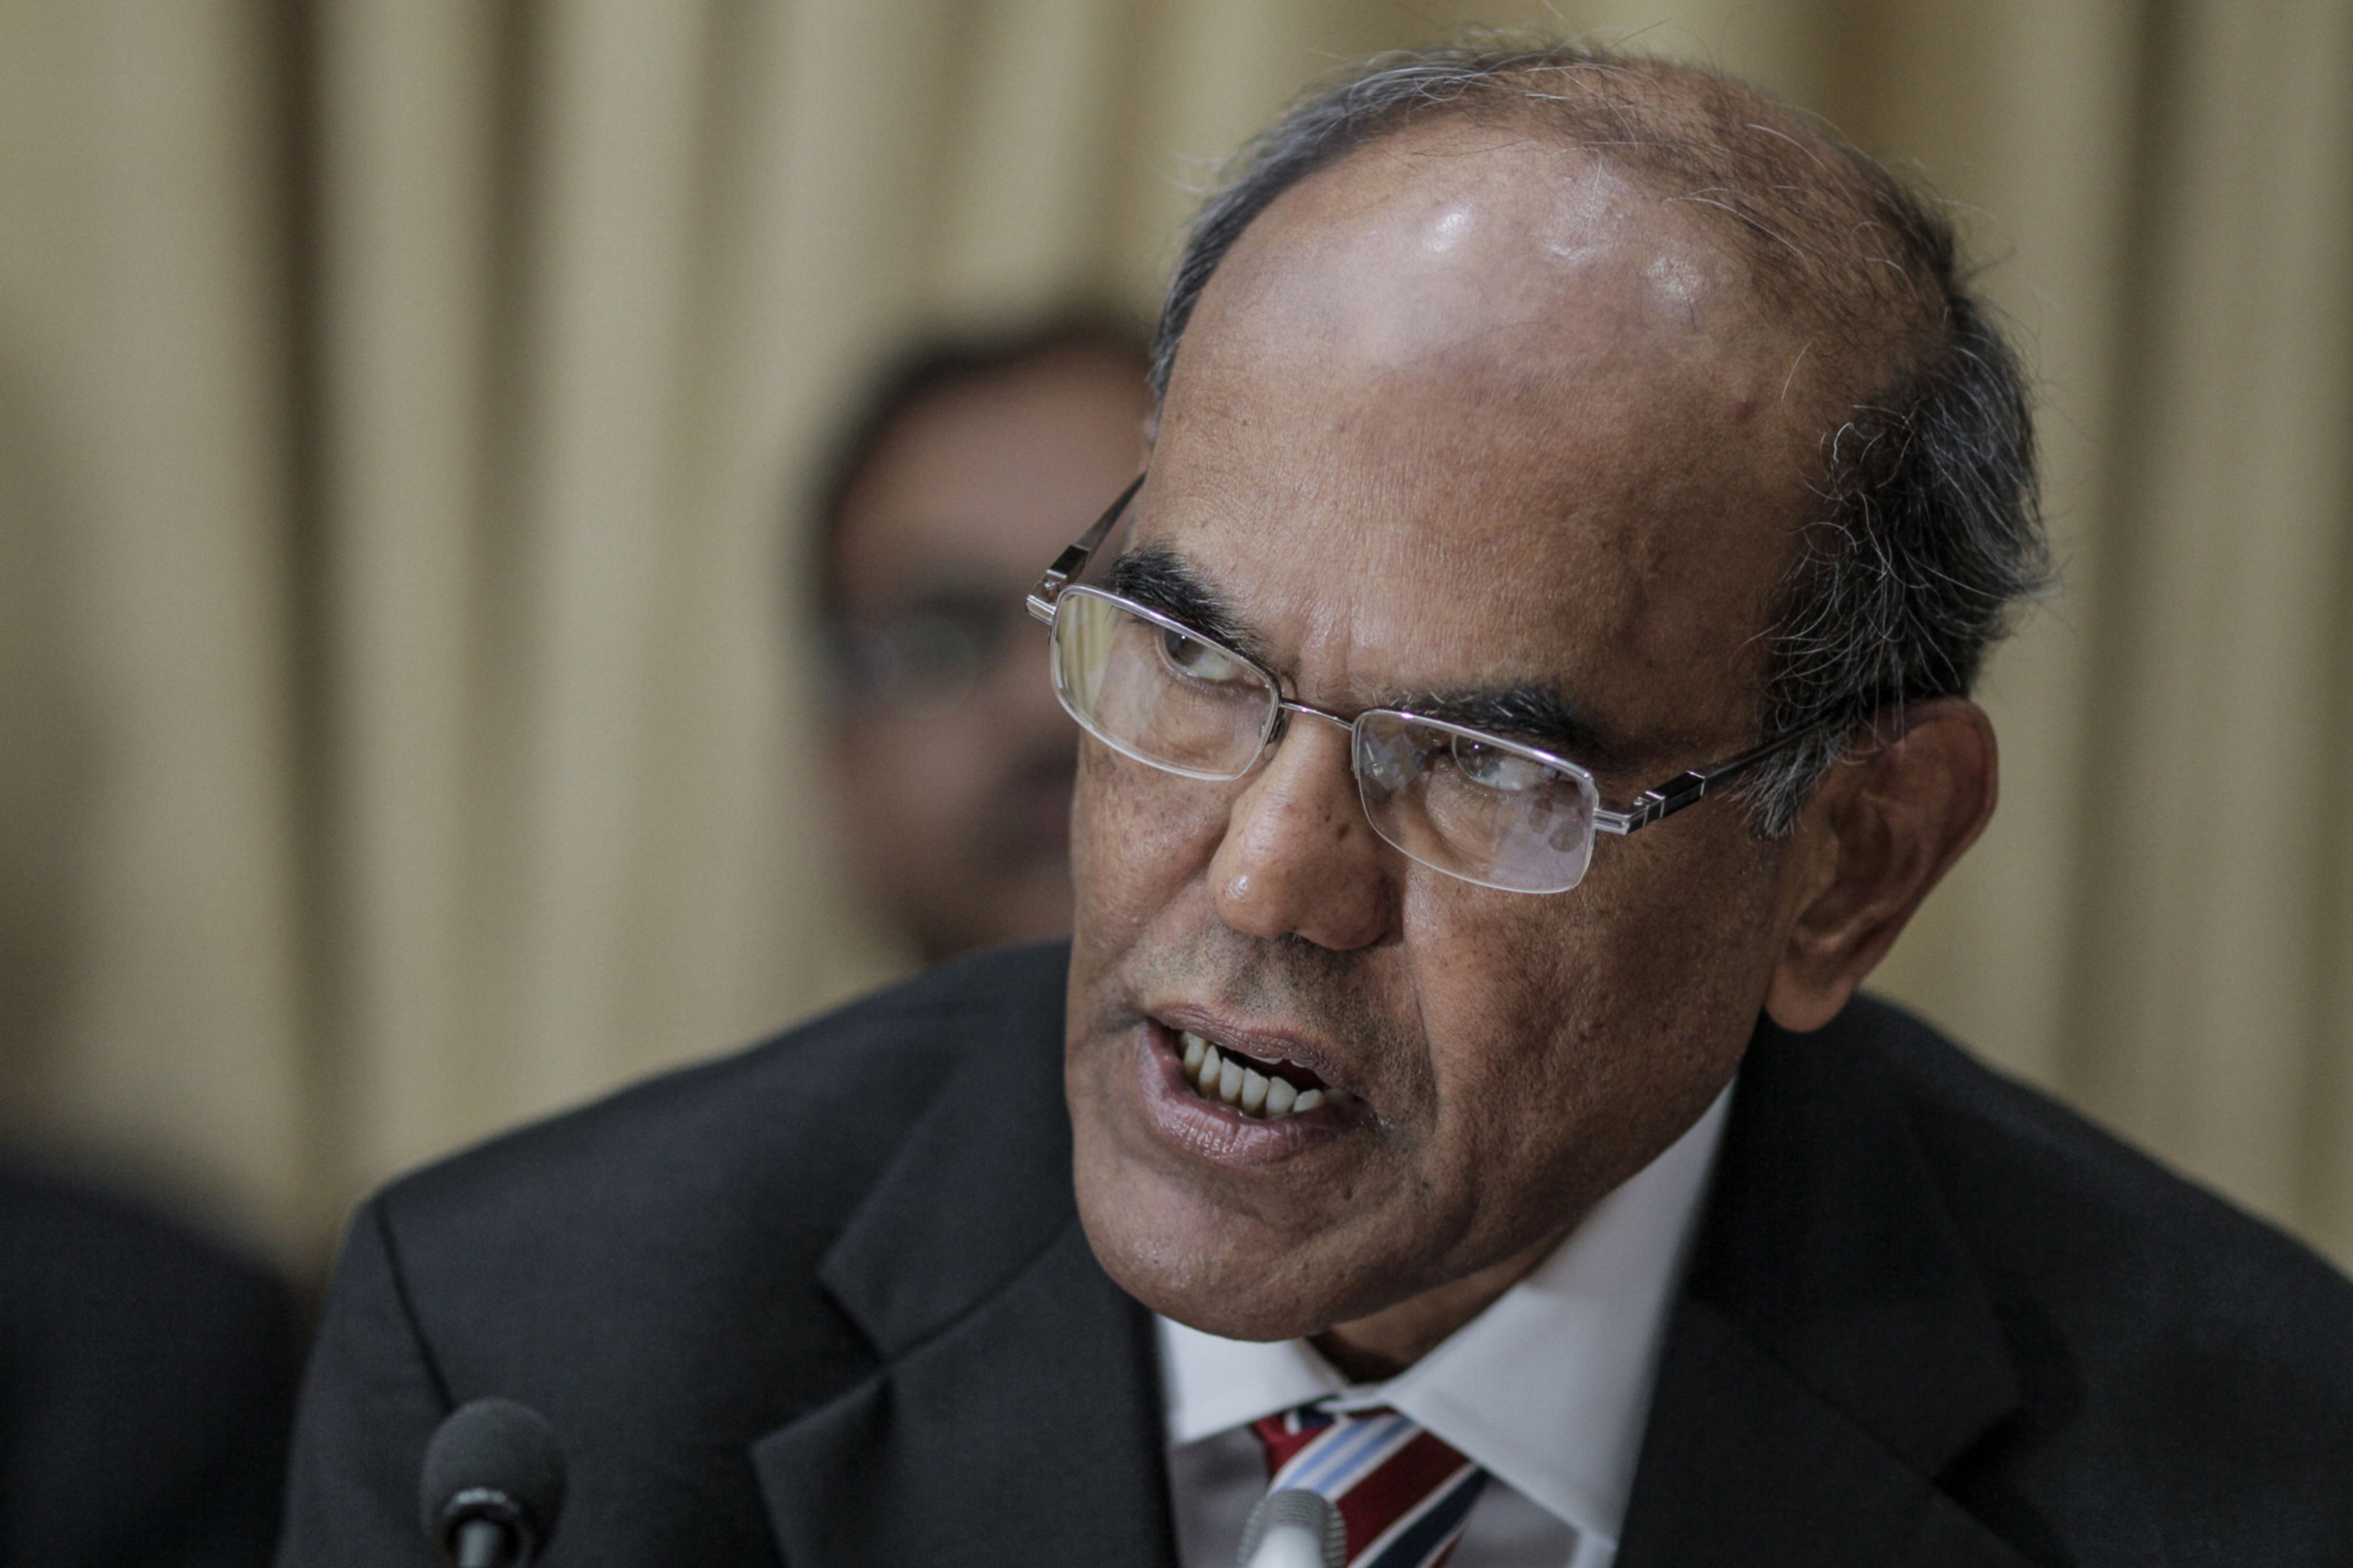 Subbarao further said a sharp decline in growth would mean a disruptive adjustment even for a rich country. (Credit: File Photo)